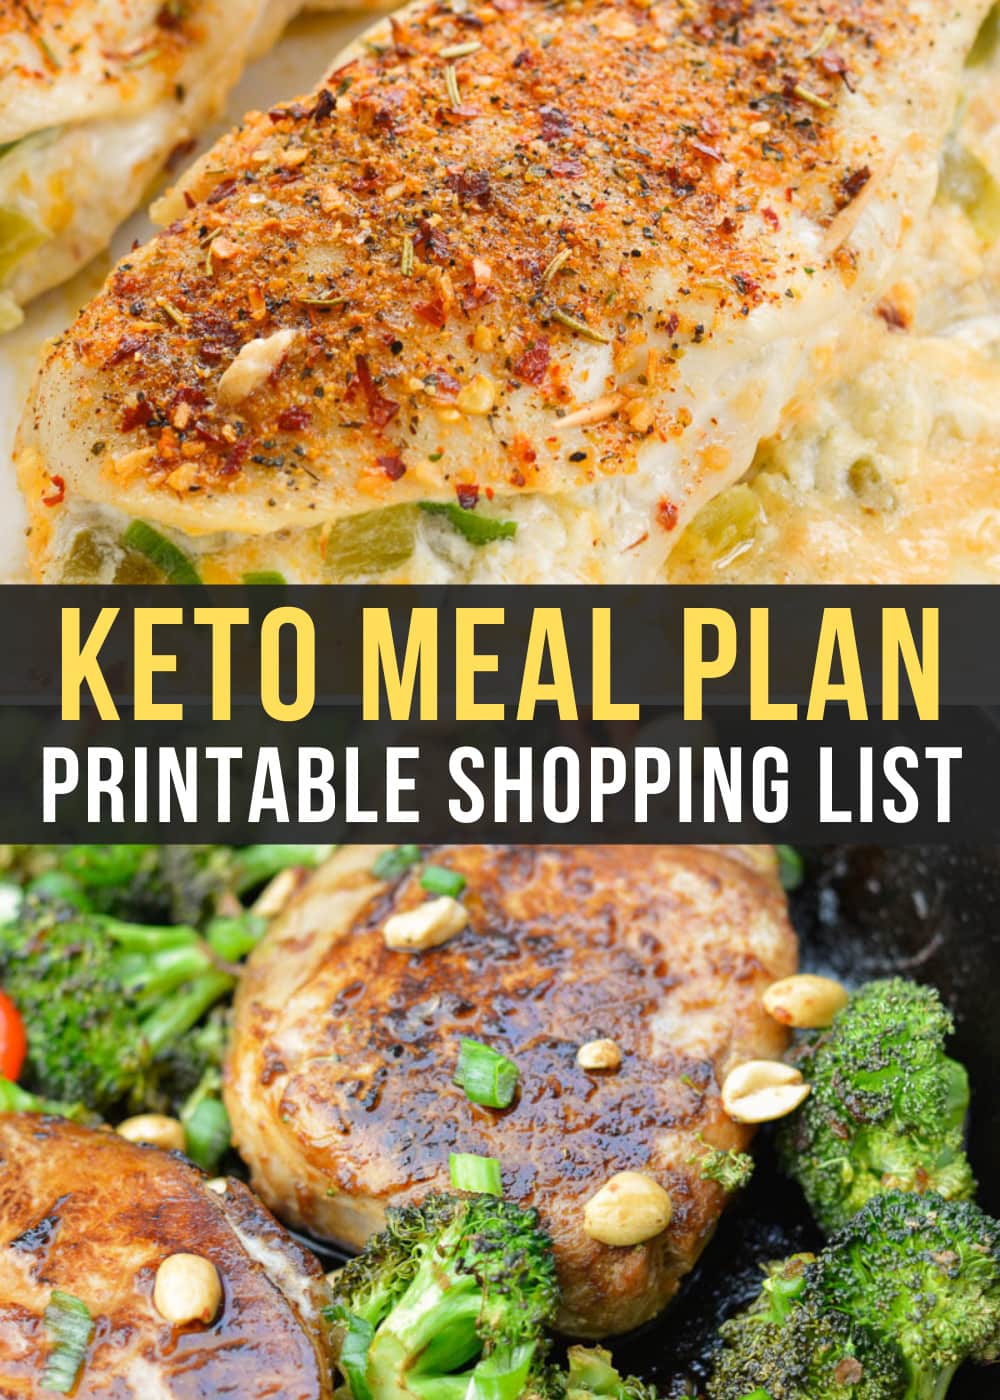 Week 25 of our Easy Keto Meal Plan includes keto dinner favorites like Green Chili Stuffed Chicken and Asian Pork Chops with Sesame Broccoli!